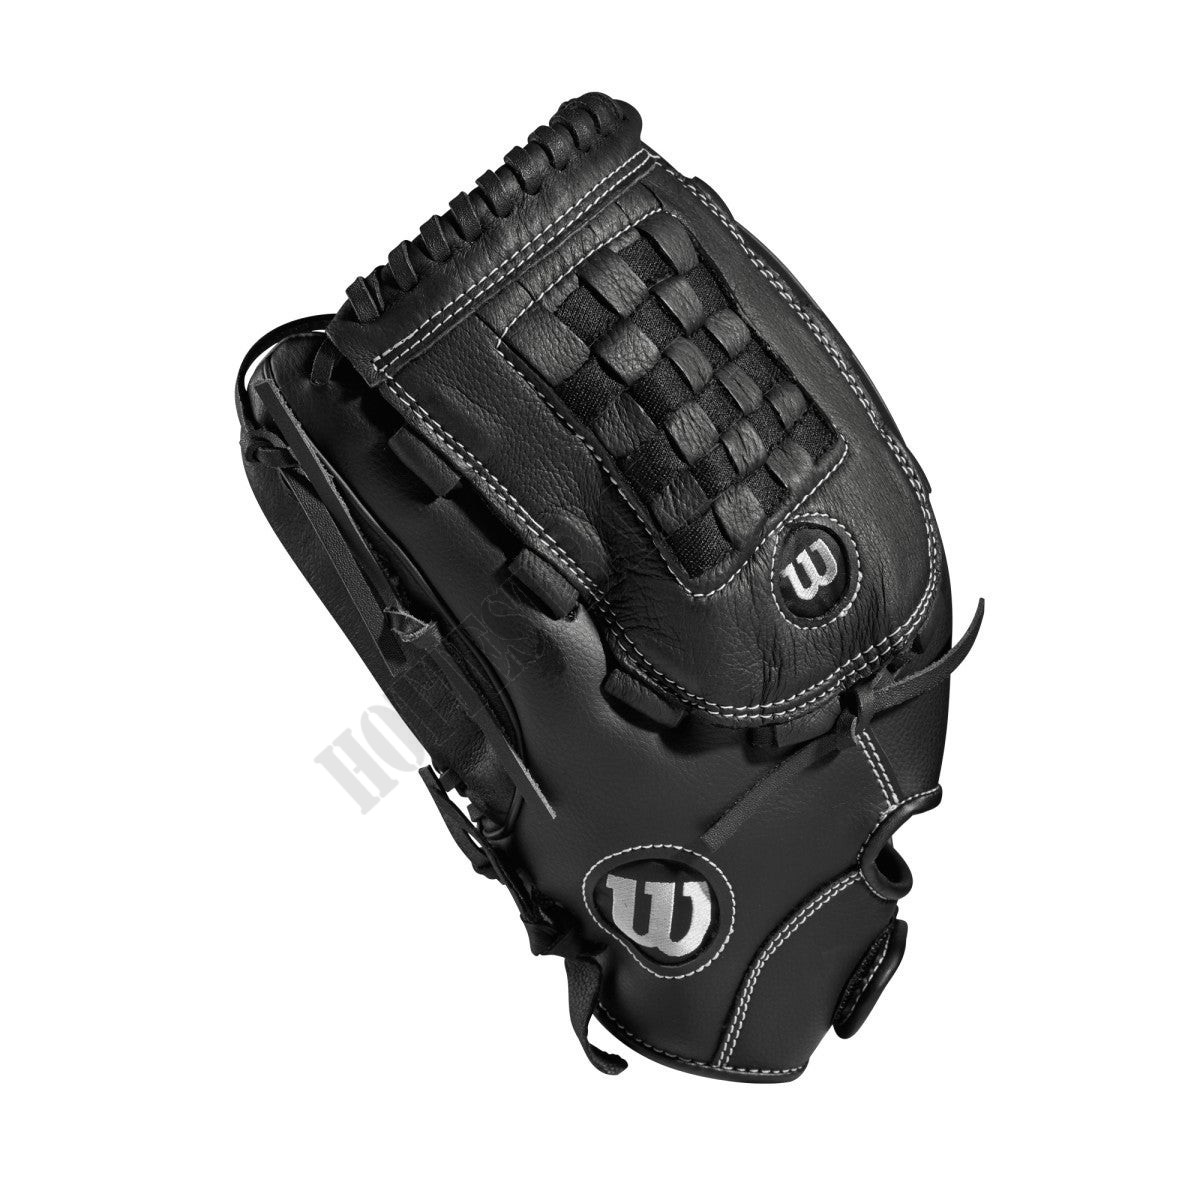 A360 14" Slowpitch Glove - Left Hand Throw ● Wilson Promotions - -5